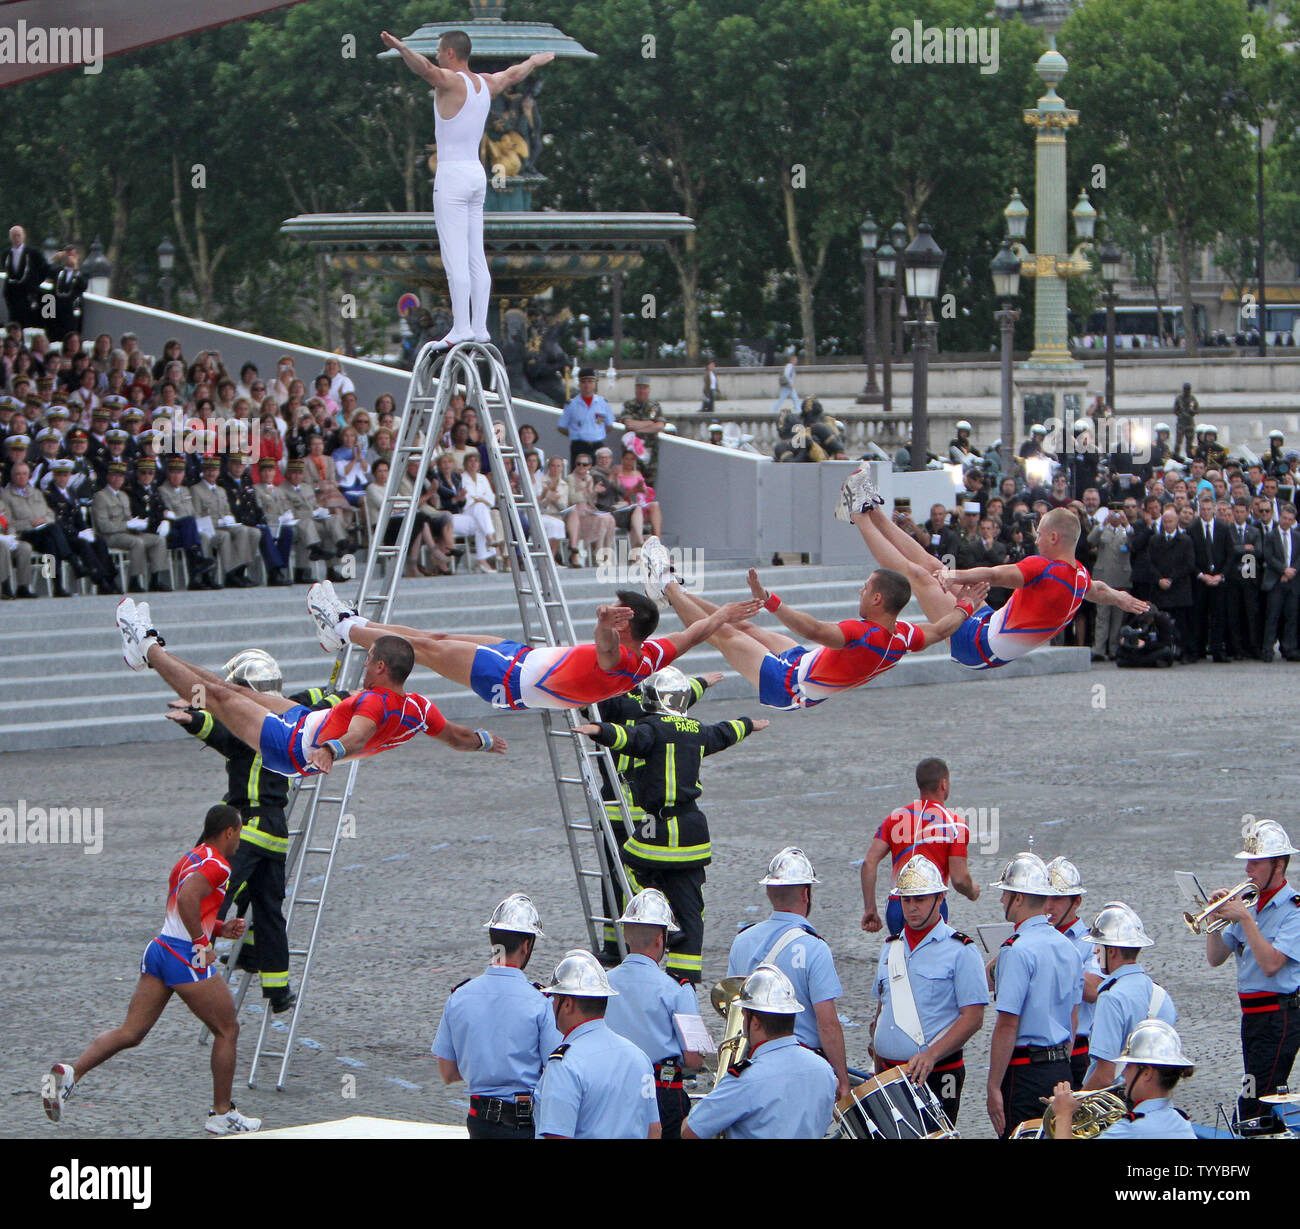 Gymnasts of the Paris fire brigade perform during the Bastille Day annual military parade at the Place de la Concorde in Paris on July 14, 2011. This year's parade highlighted the regiments of the overseas French territories including Guadeloupe, Guyana, Martinique, Reunion, Mayotte, New Caledonia and Polynesia.   UPI/David Silpa Stock Photo